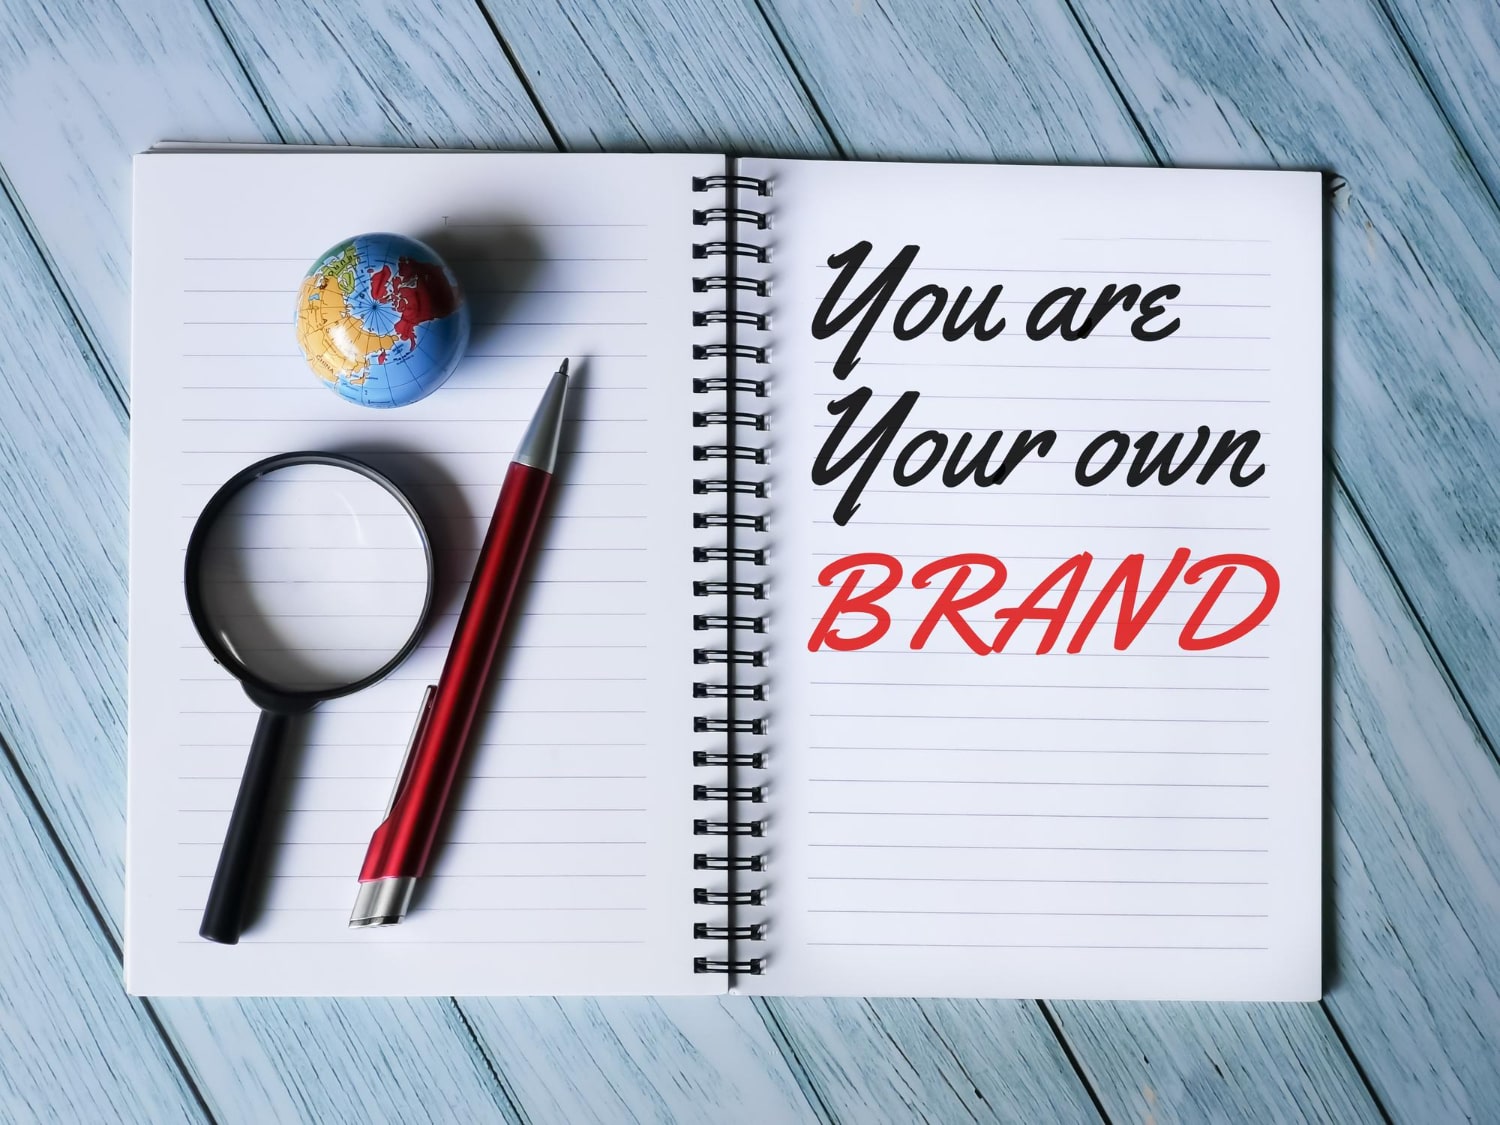 you are your own brand